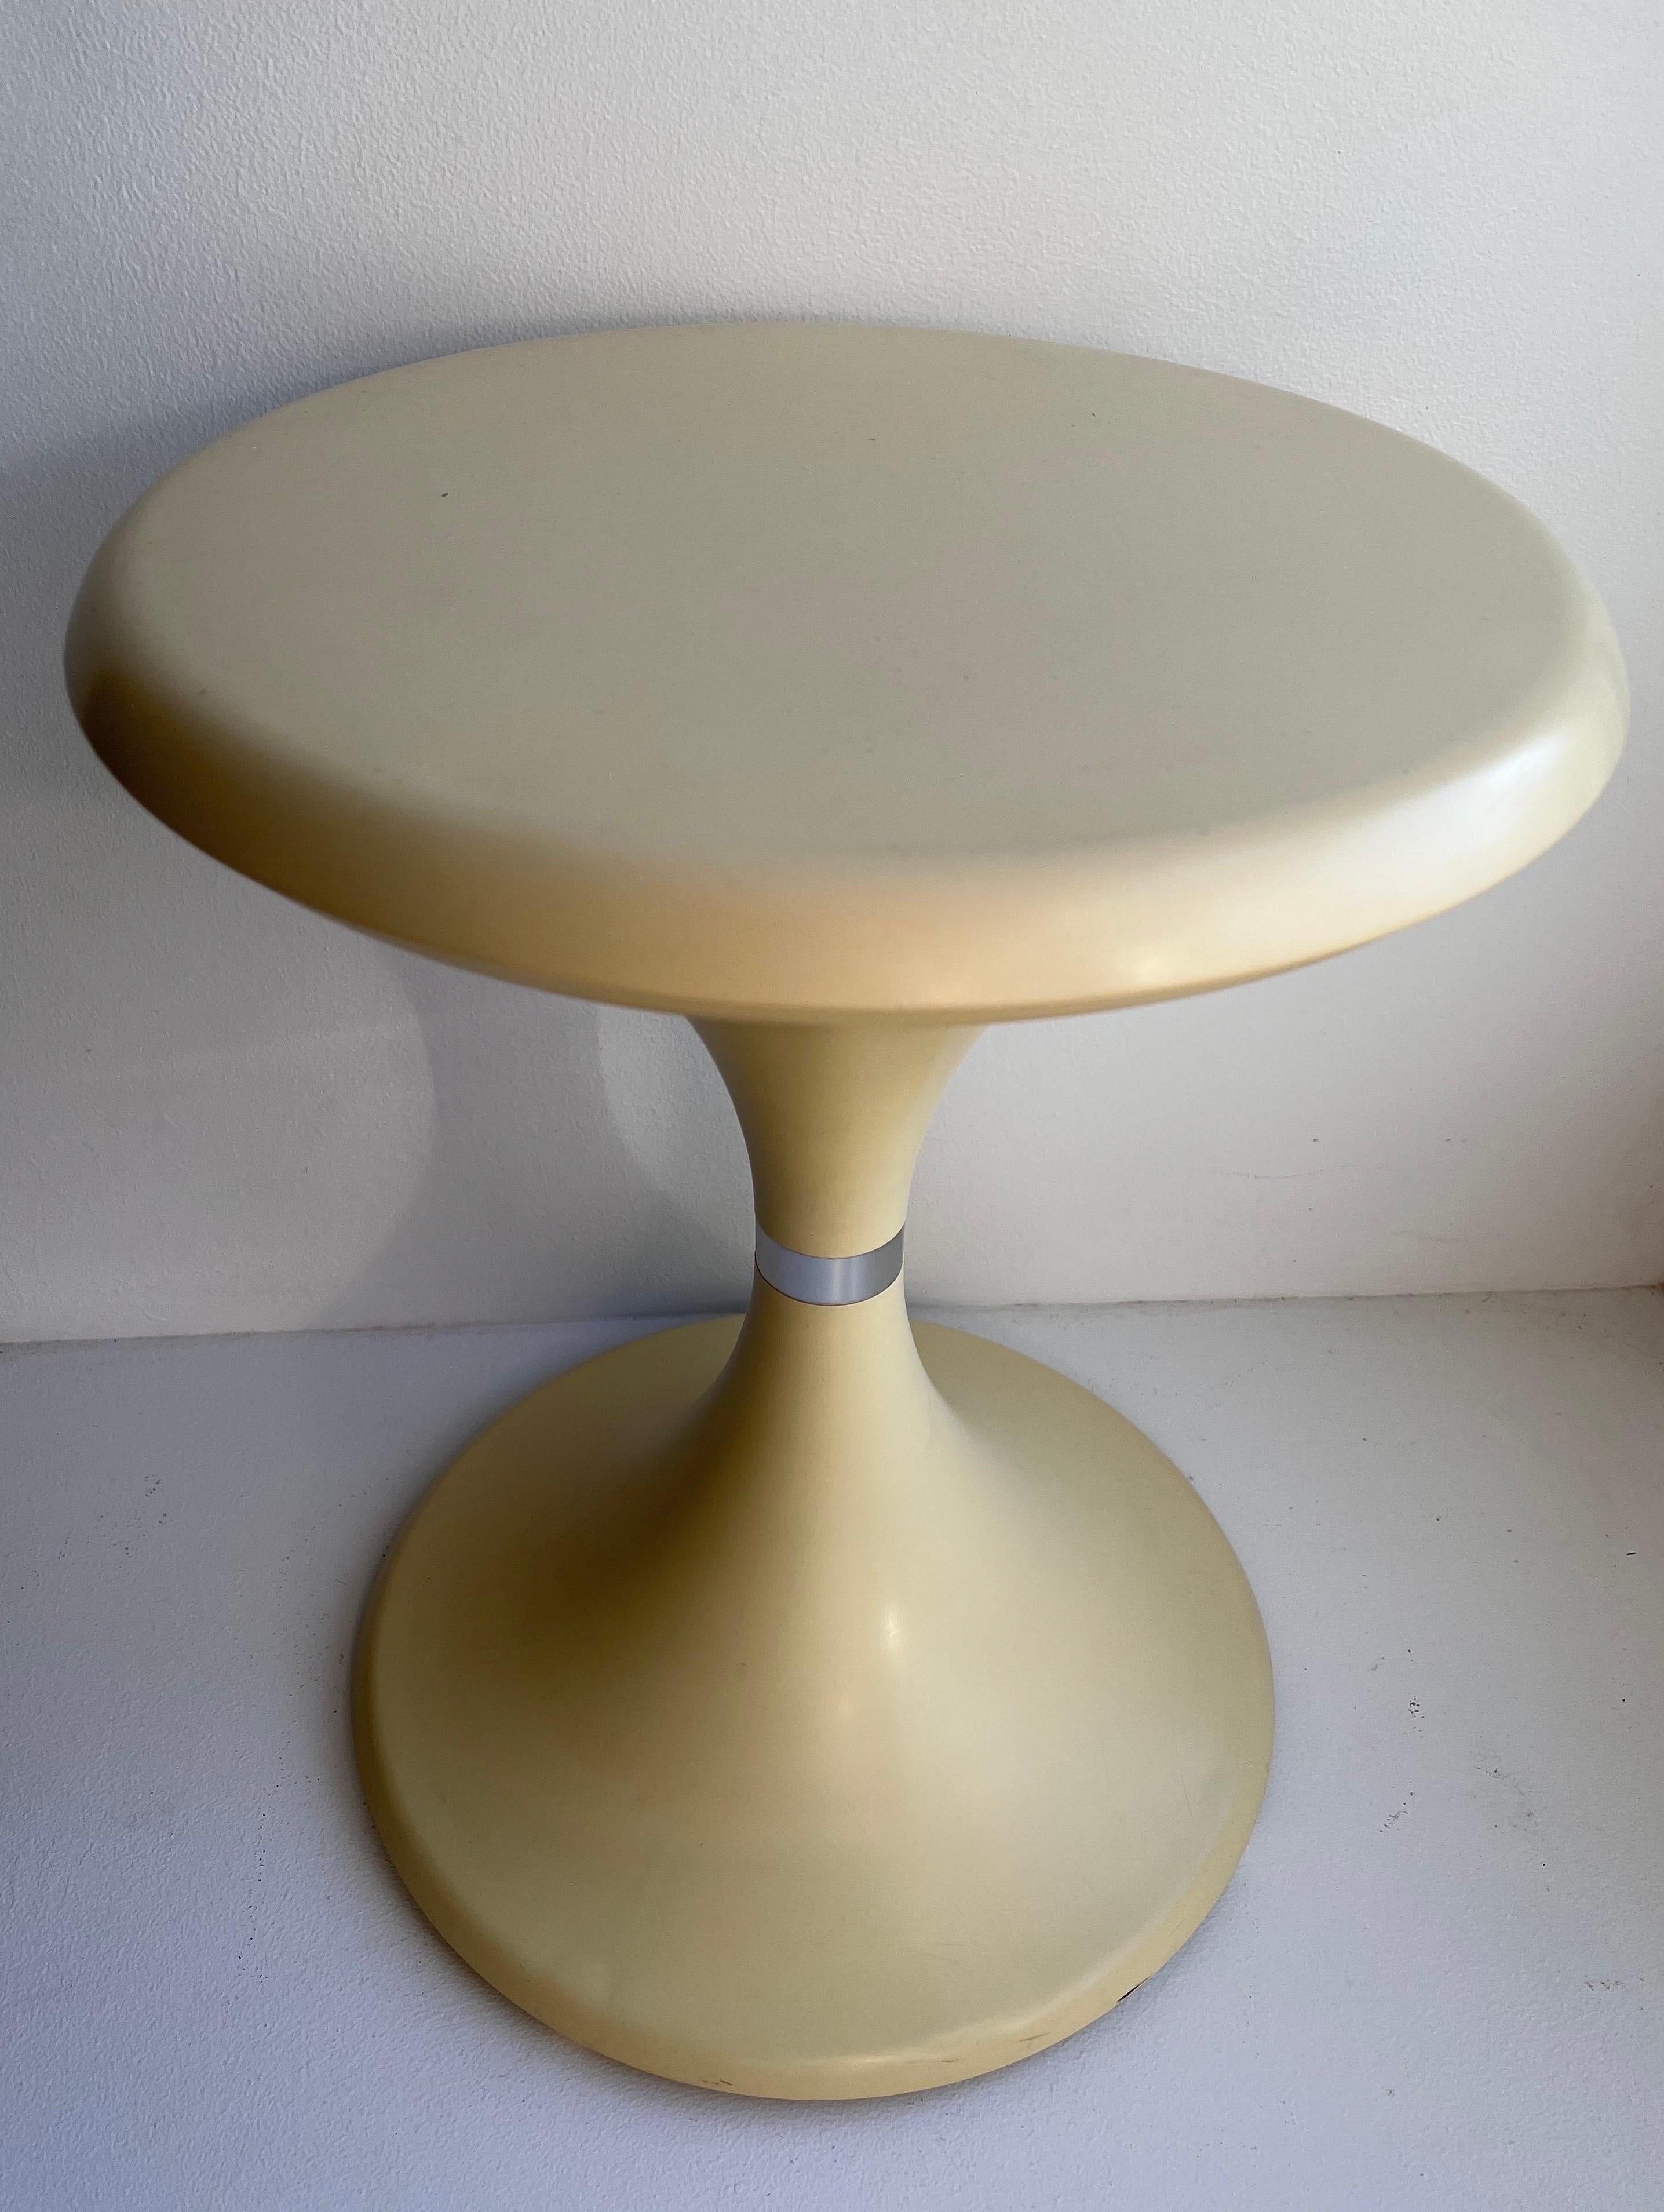 American Space Age End Table / Stool in the Style of I. Gardella & A. Castelli, c. 1960s For Sale